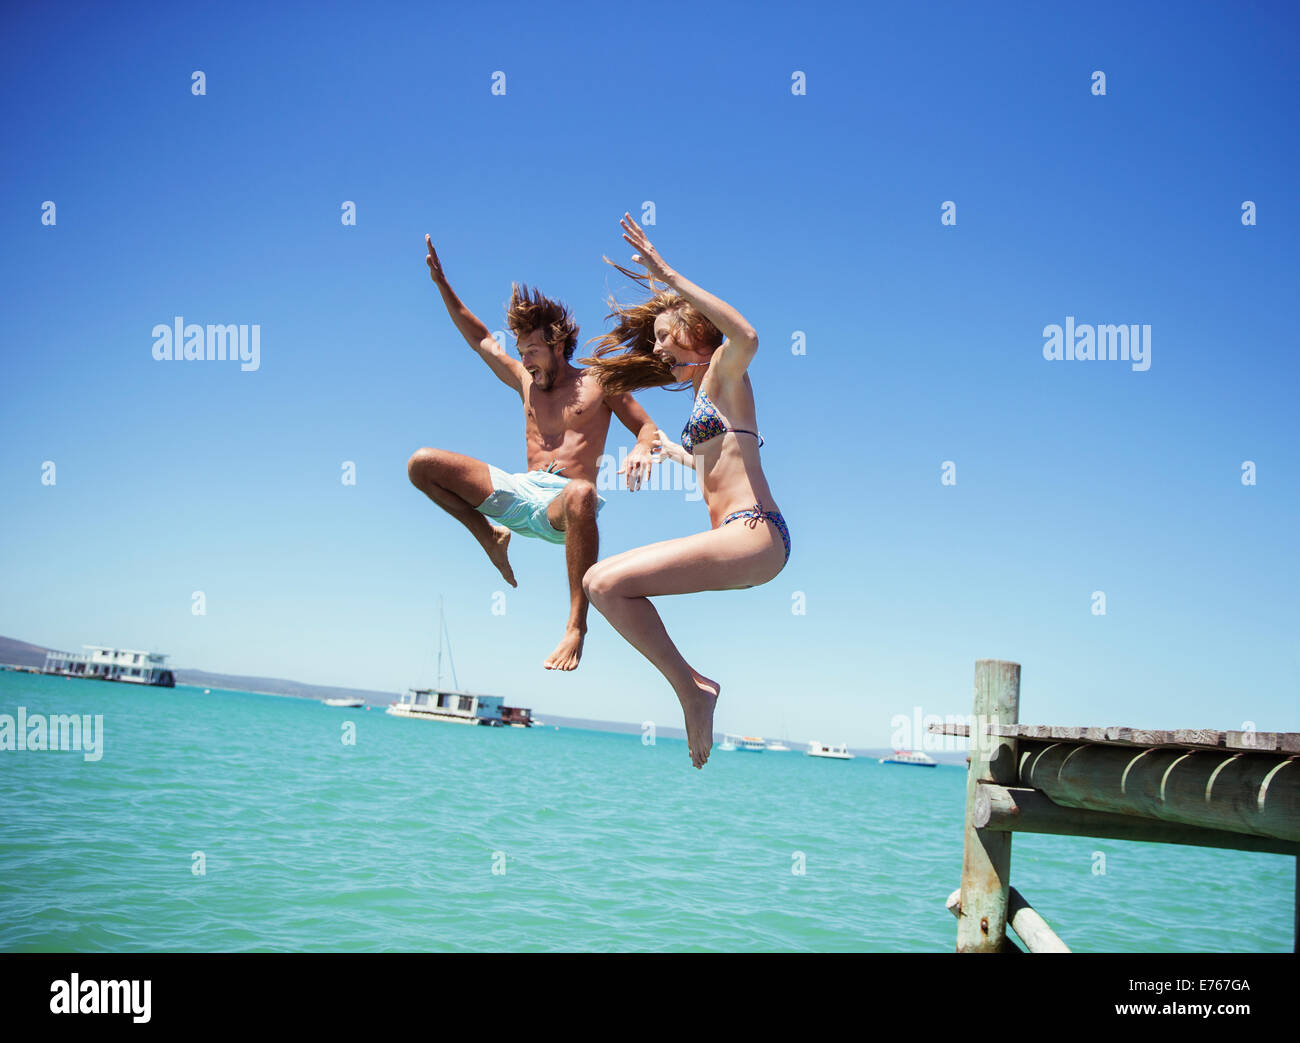 Couple jumping off wooden dock together Stock Photo